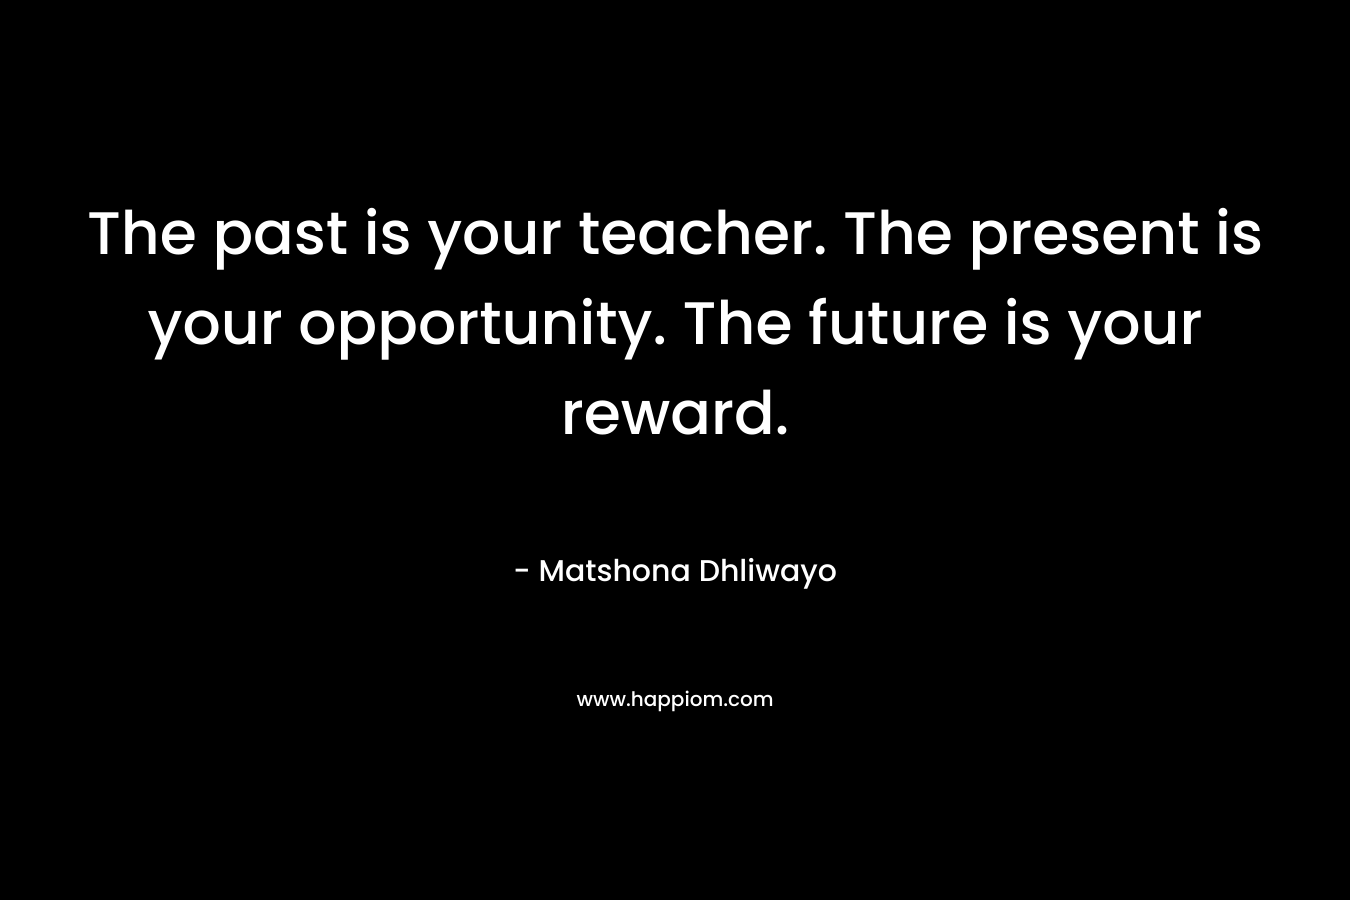 The past is your teacher. The present is your opportunity. The future is your reward.